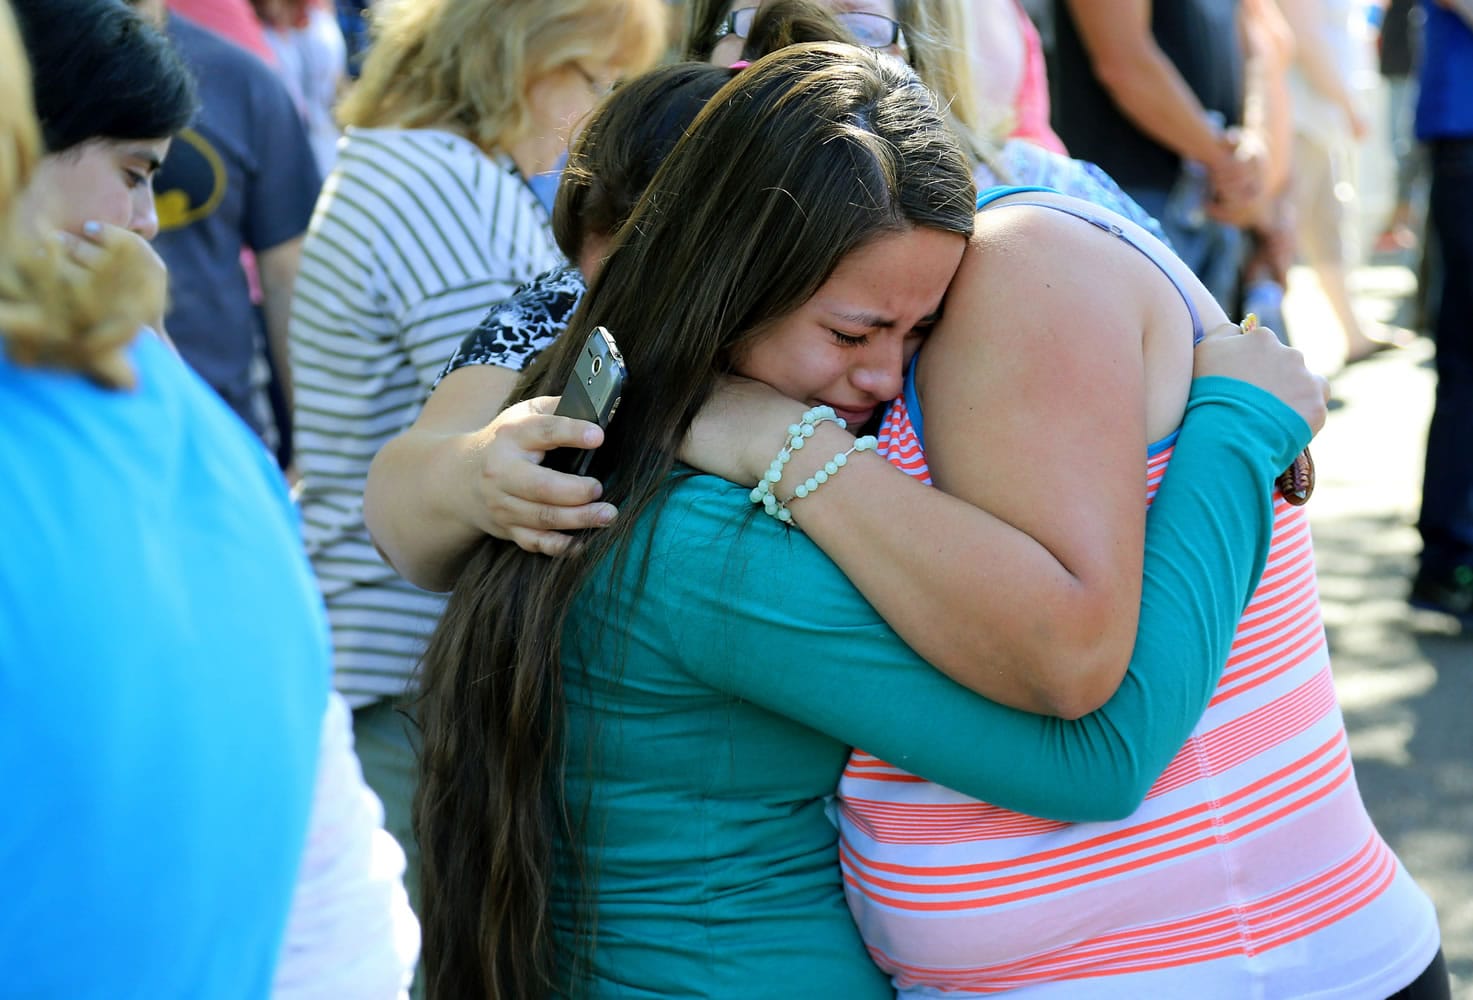 Jessica Vazquez, left, hugs her aunt Leticia Acaraz as they await word on Acaraz's daughter at the local fairgrounds after a shooting at Umpqua Community College in Roseburg, Ore., on Thursday, Oct. 1, 2015.